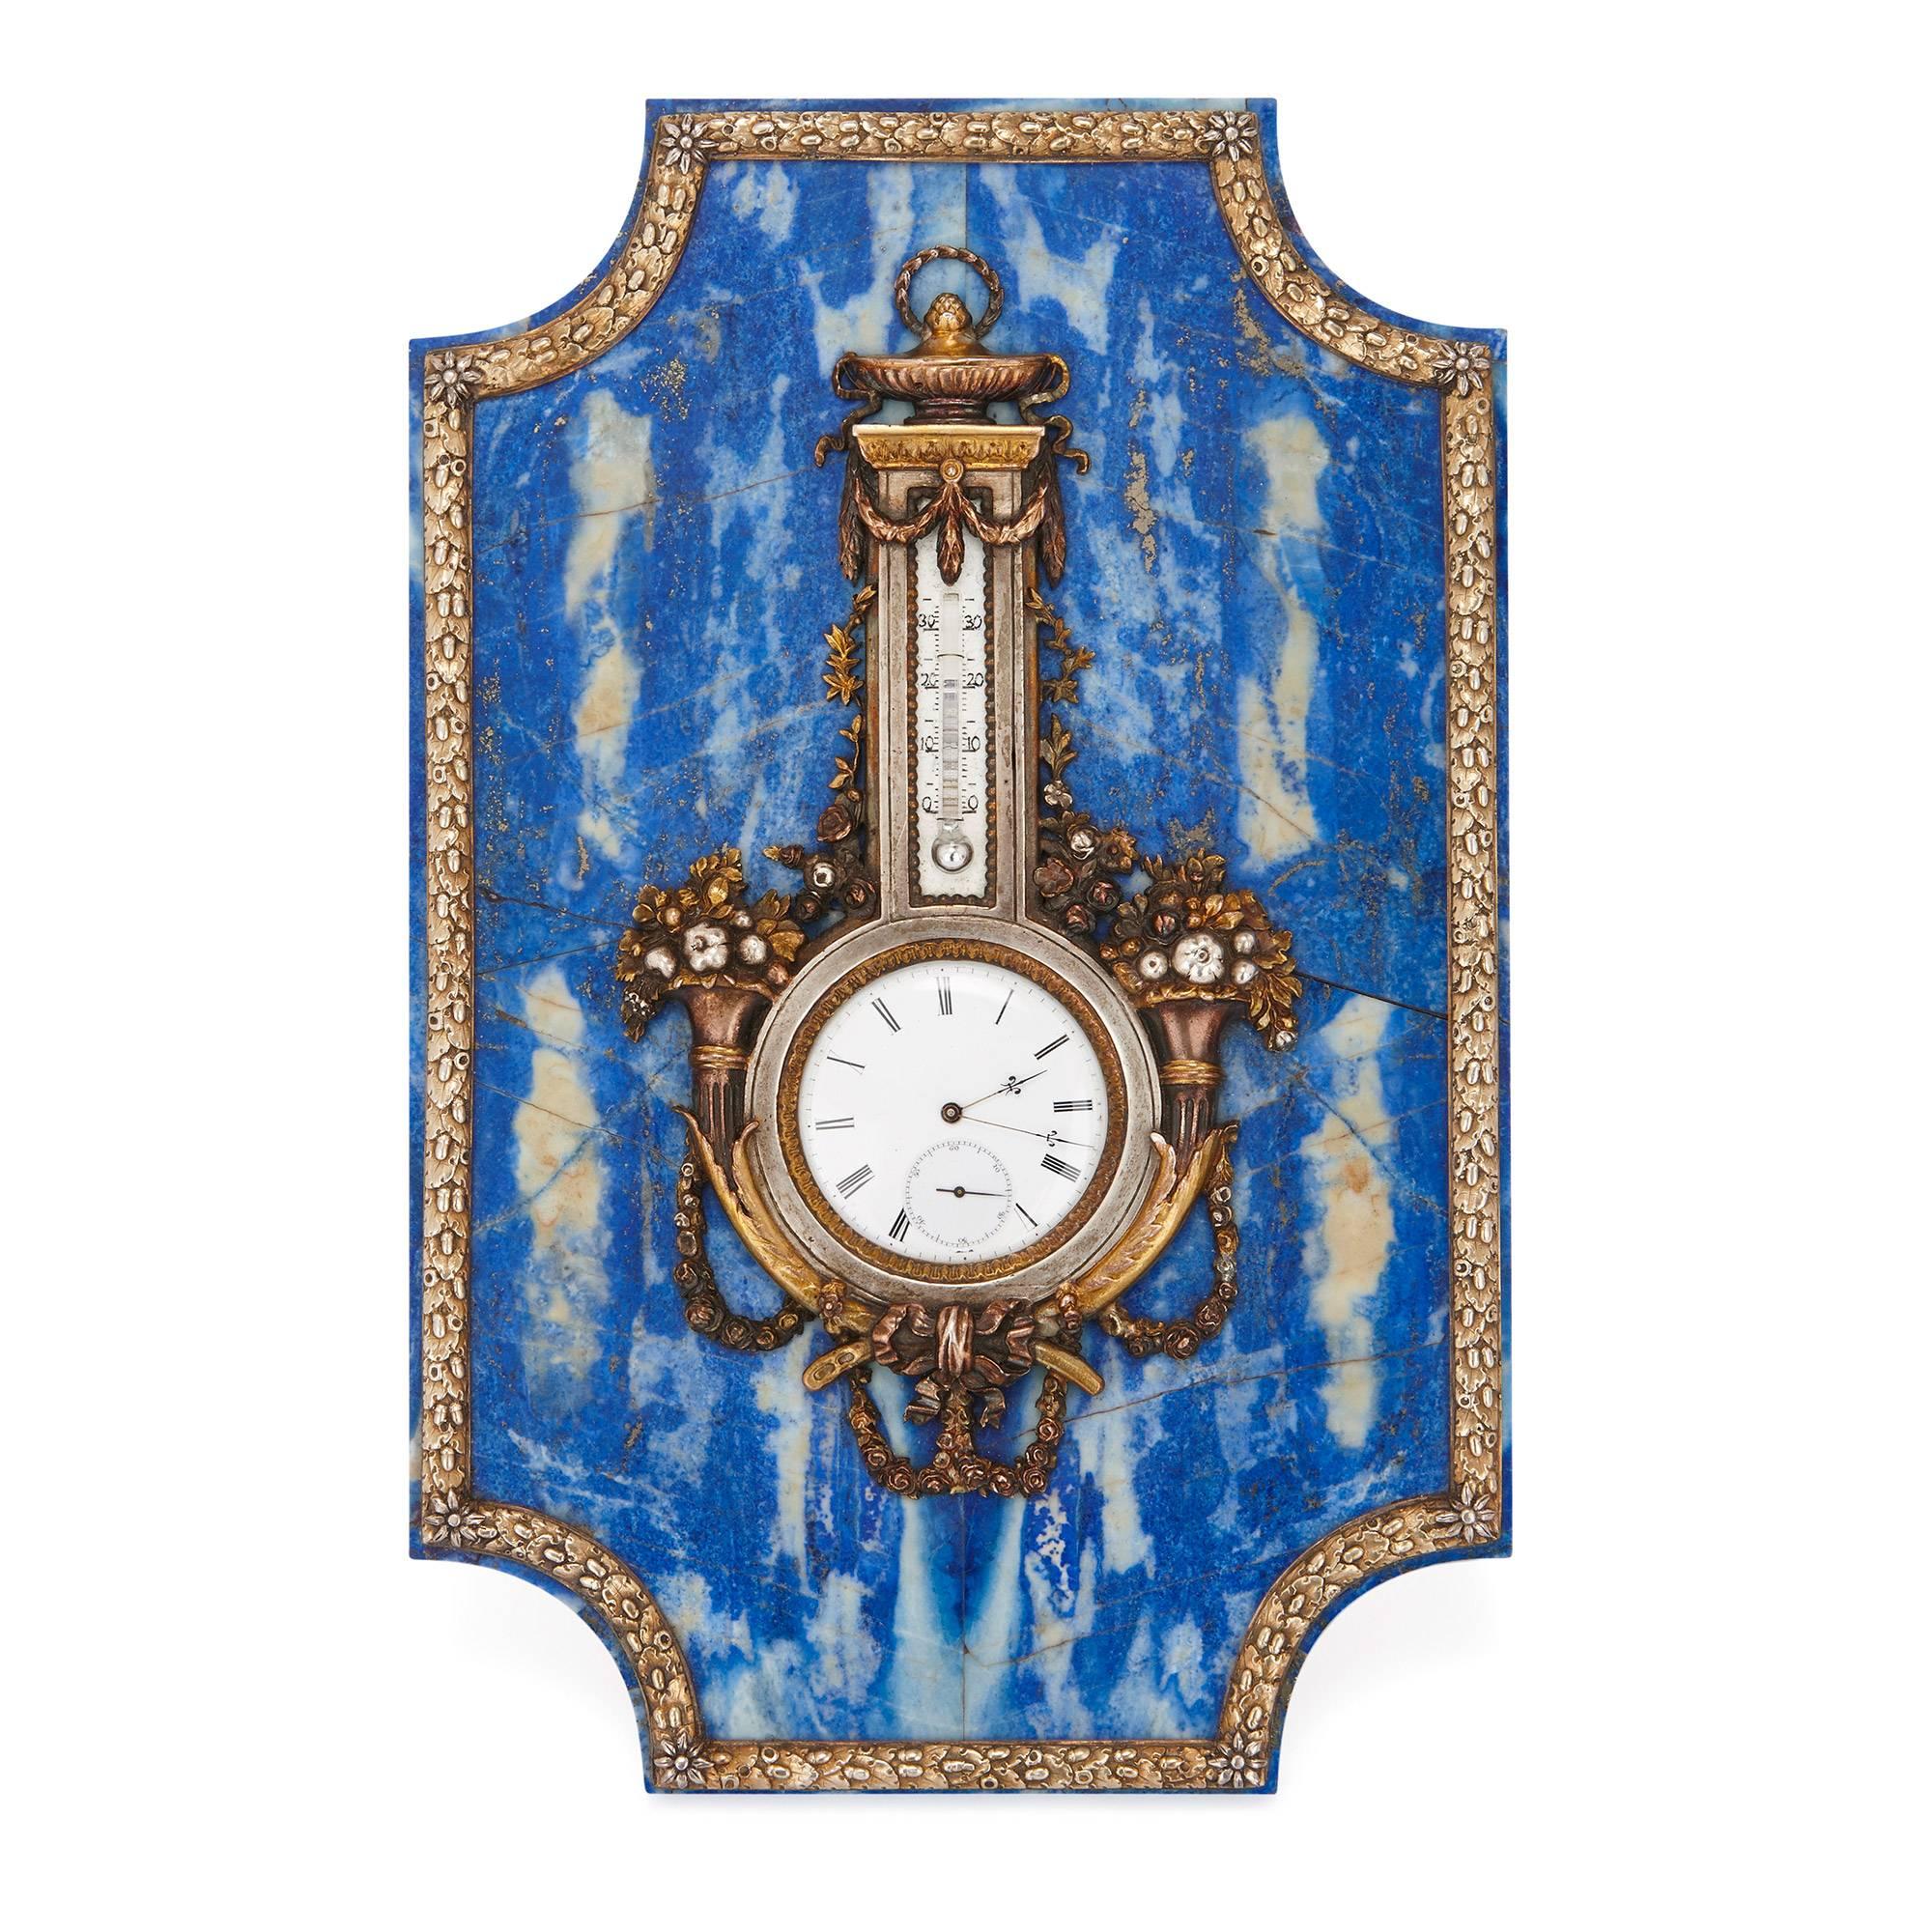 The body of this fine table clock and barometer is veneered in lapis lazuli and supported by a hinged arm to the reverse. The clock and barometer dials in the centre are both made from white enamel, and framed with decorative gilt metal mounts in